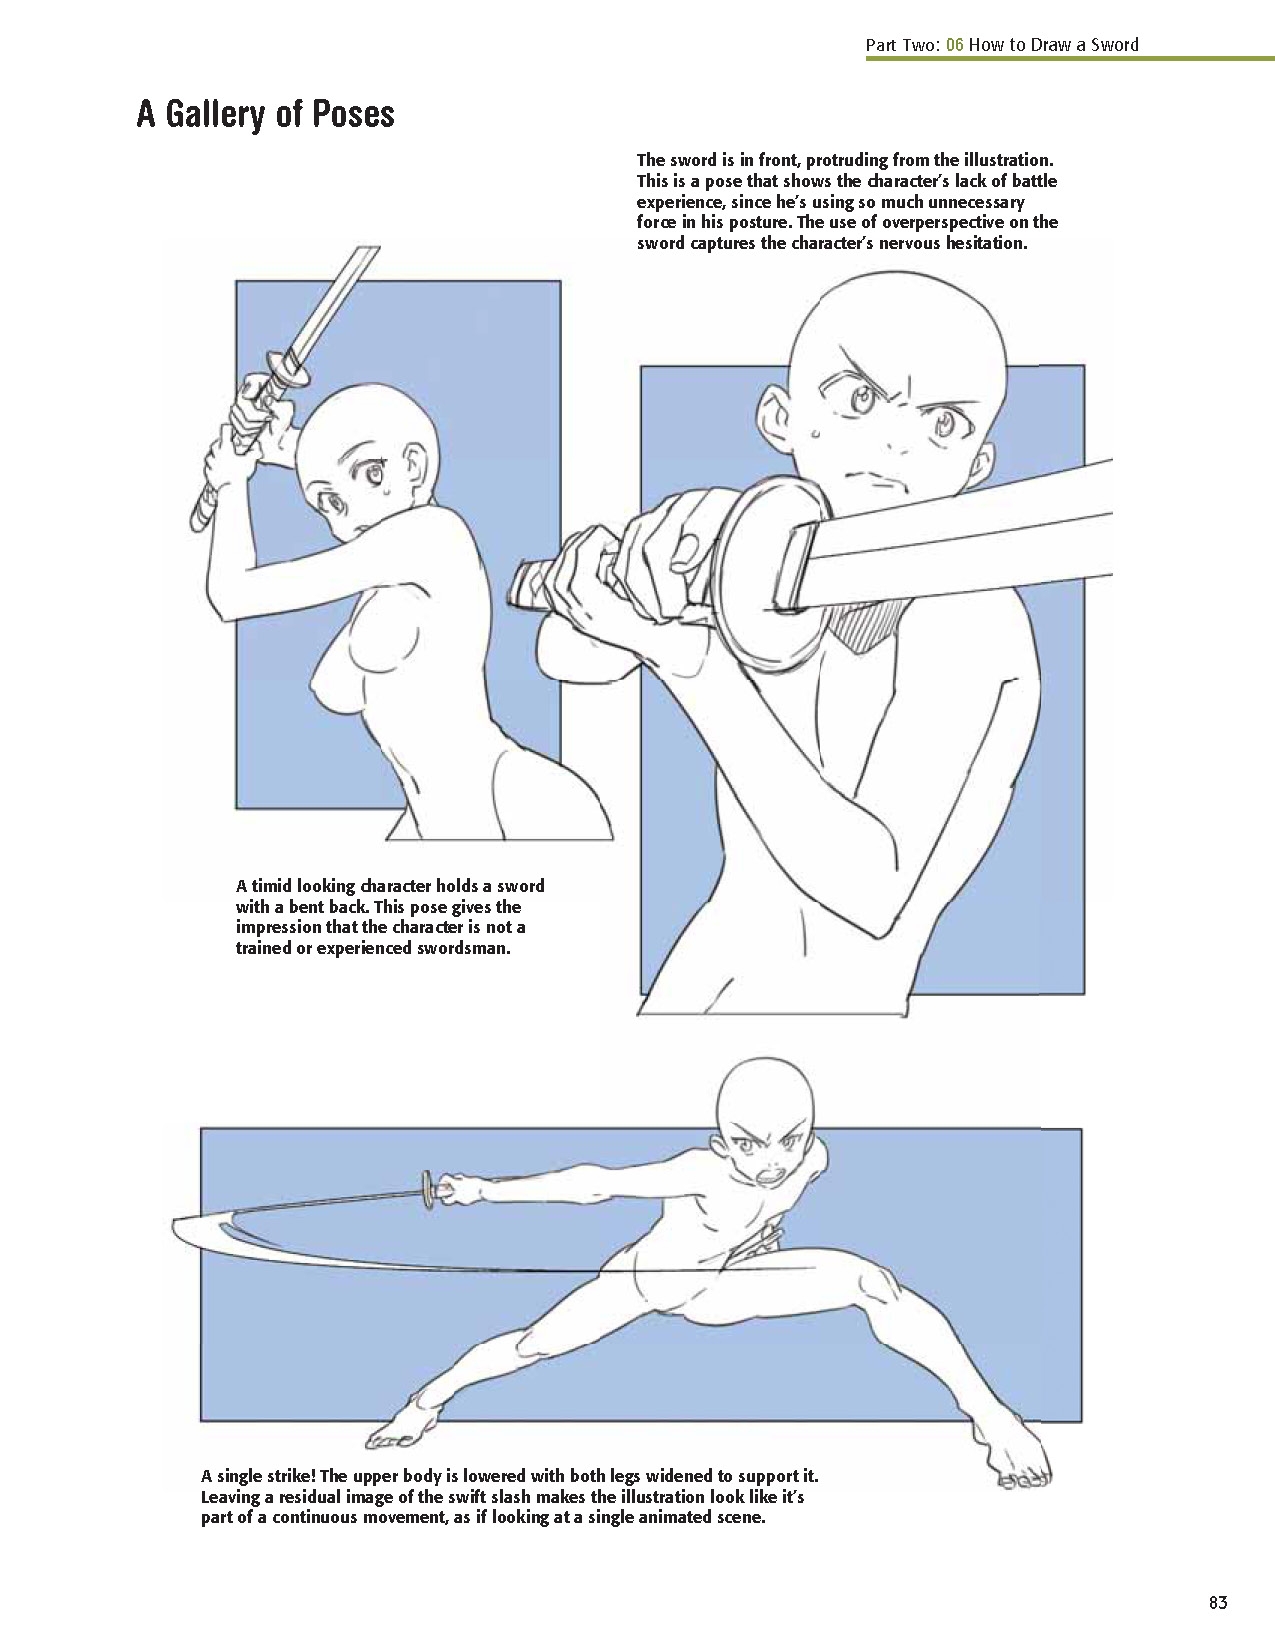 The Complete Guide to Drawing Dynamic Manga Sword Fighters: (An Action-Packed Guide with Over 600 illustrations) 84